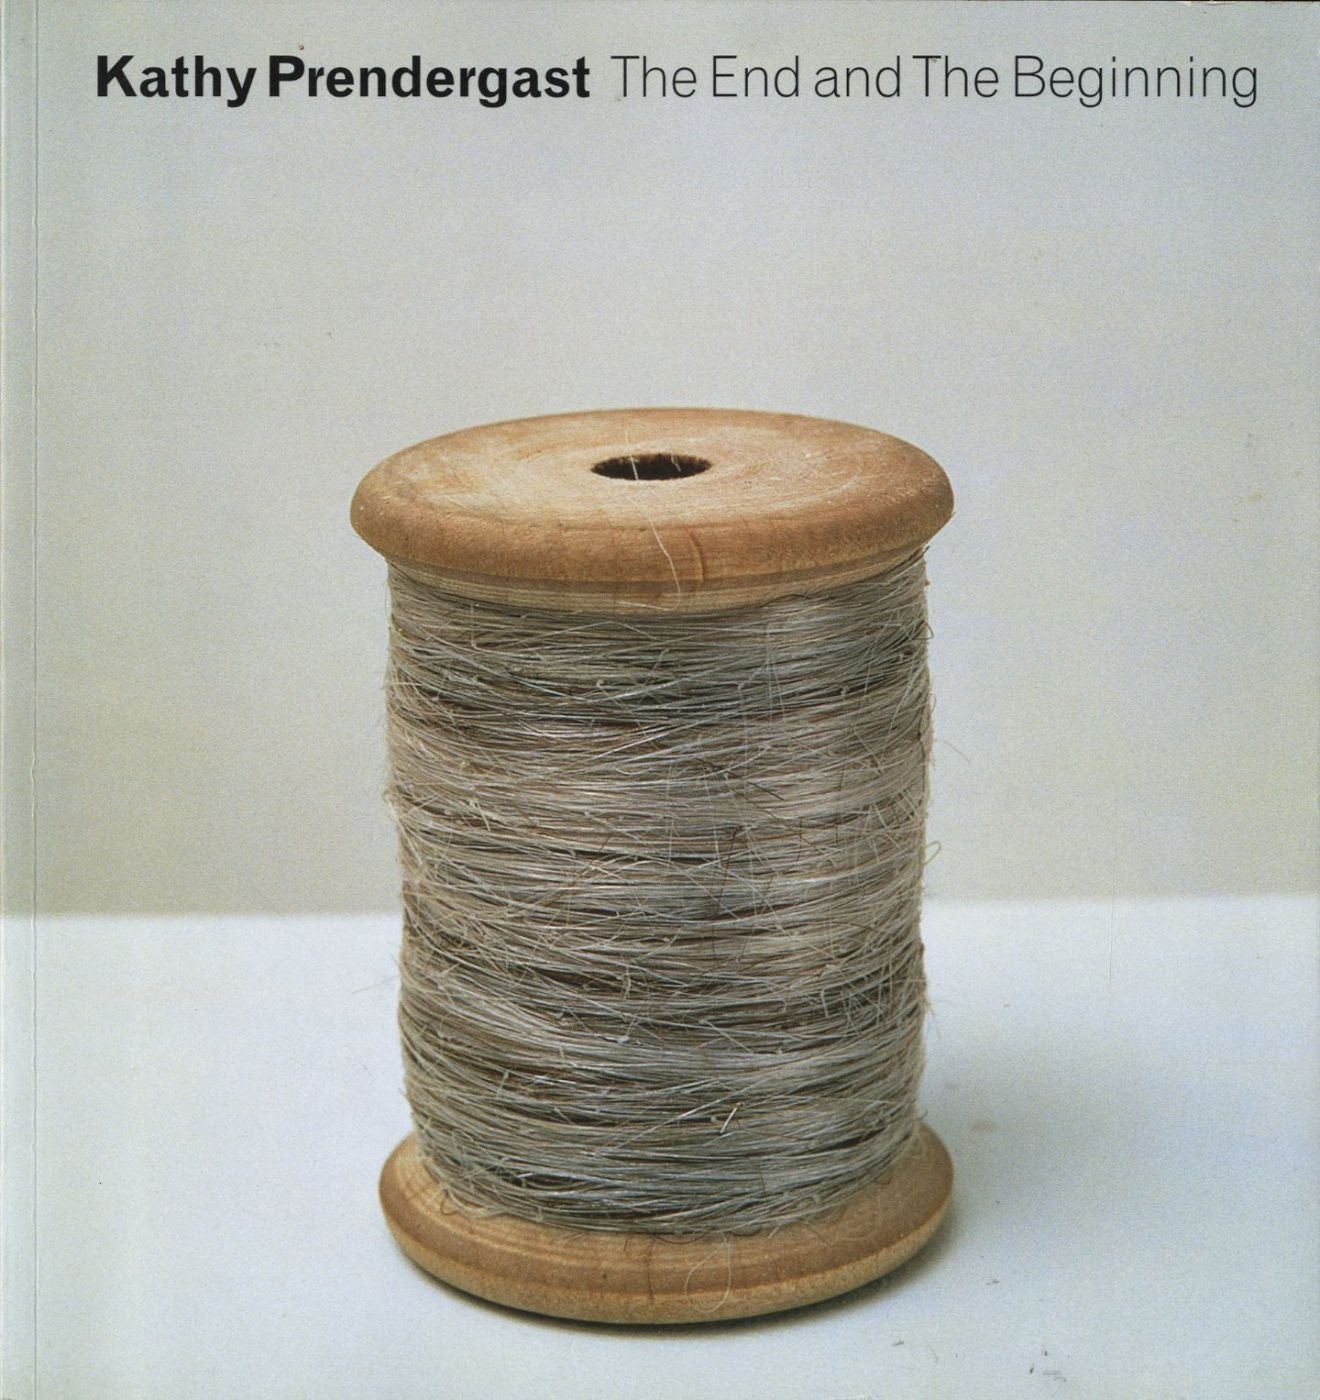 Kathy Prendergast: The End and The Beginning